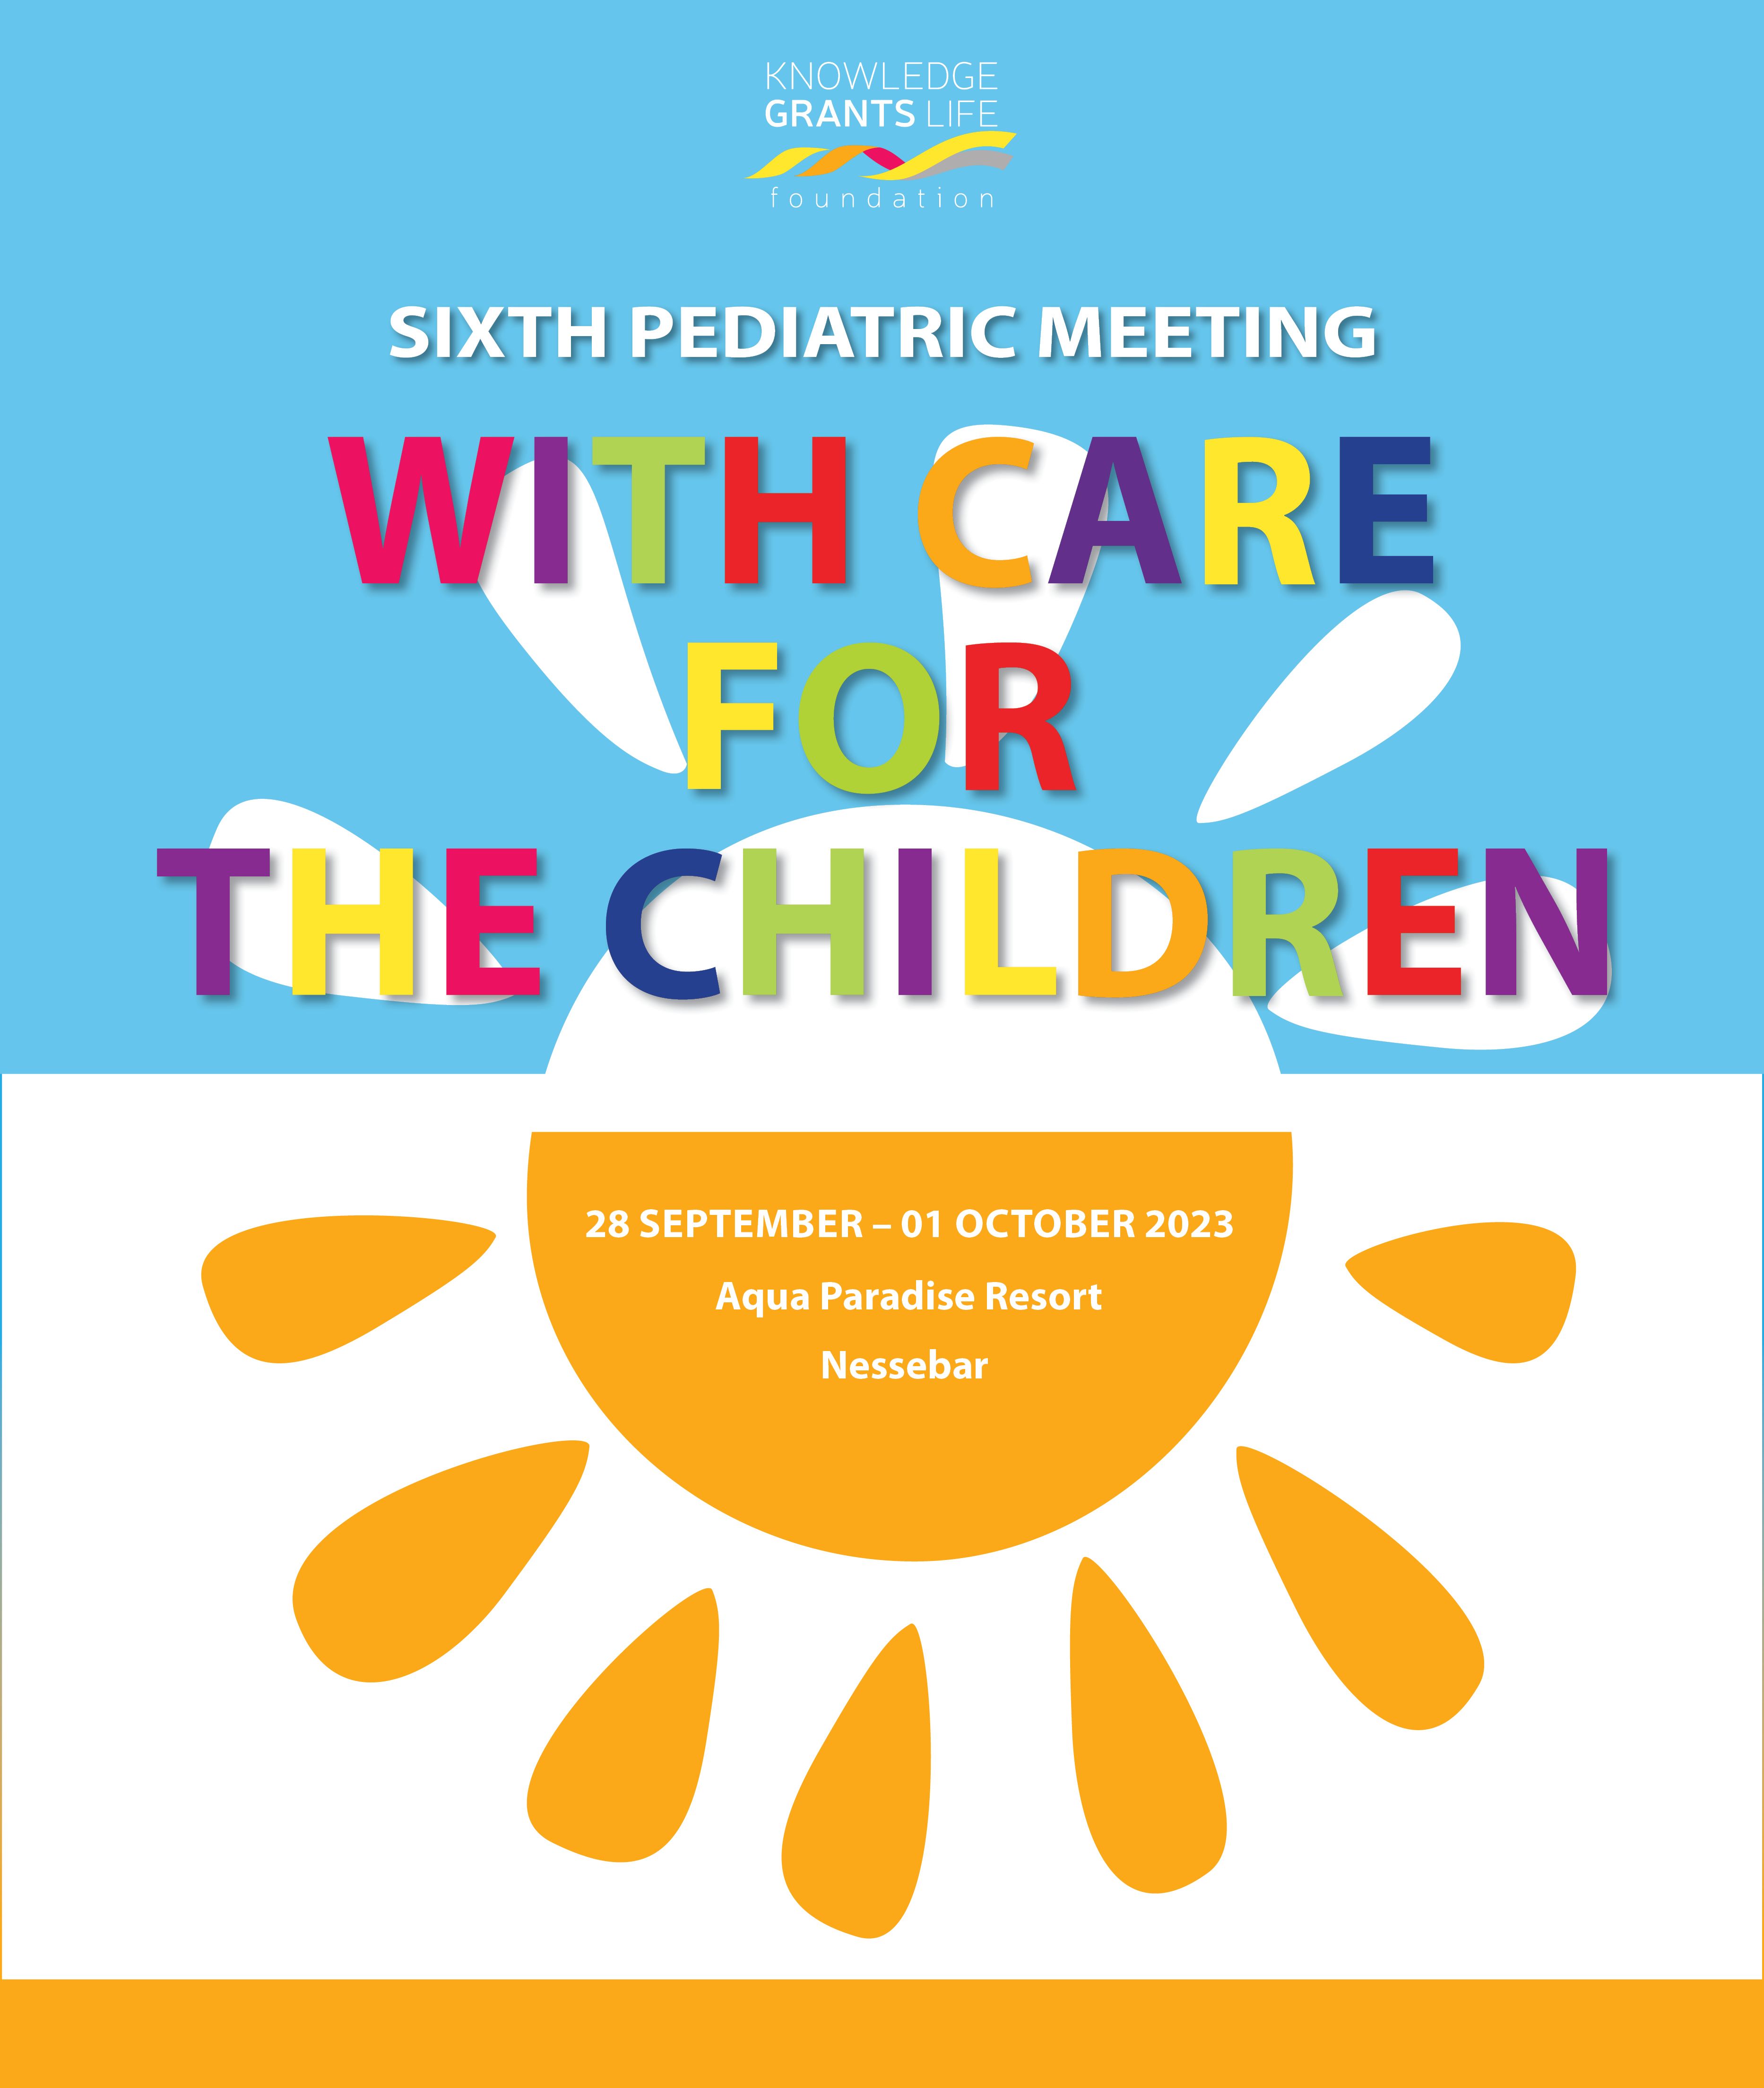 Sixth Pediatric Meeting “With Care for the Children”